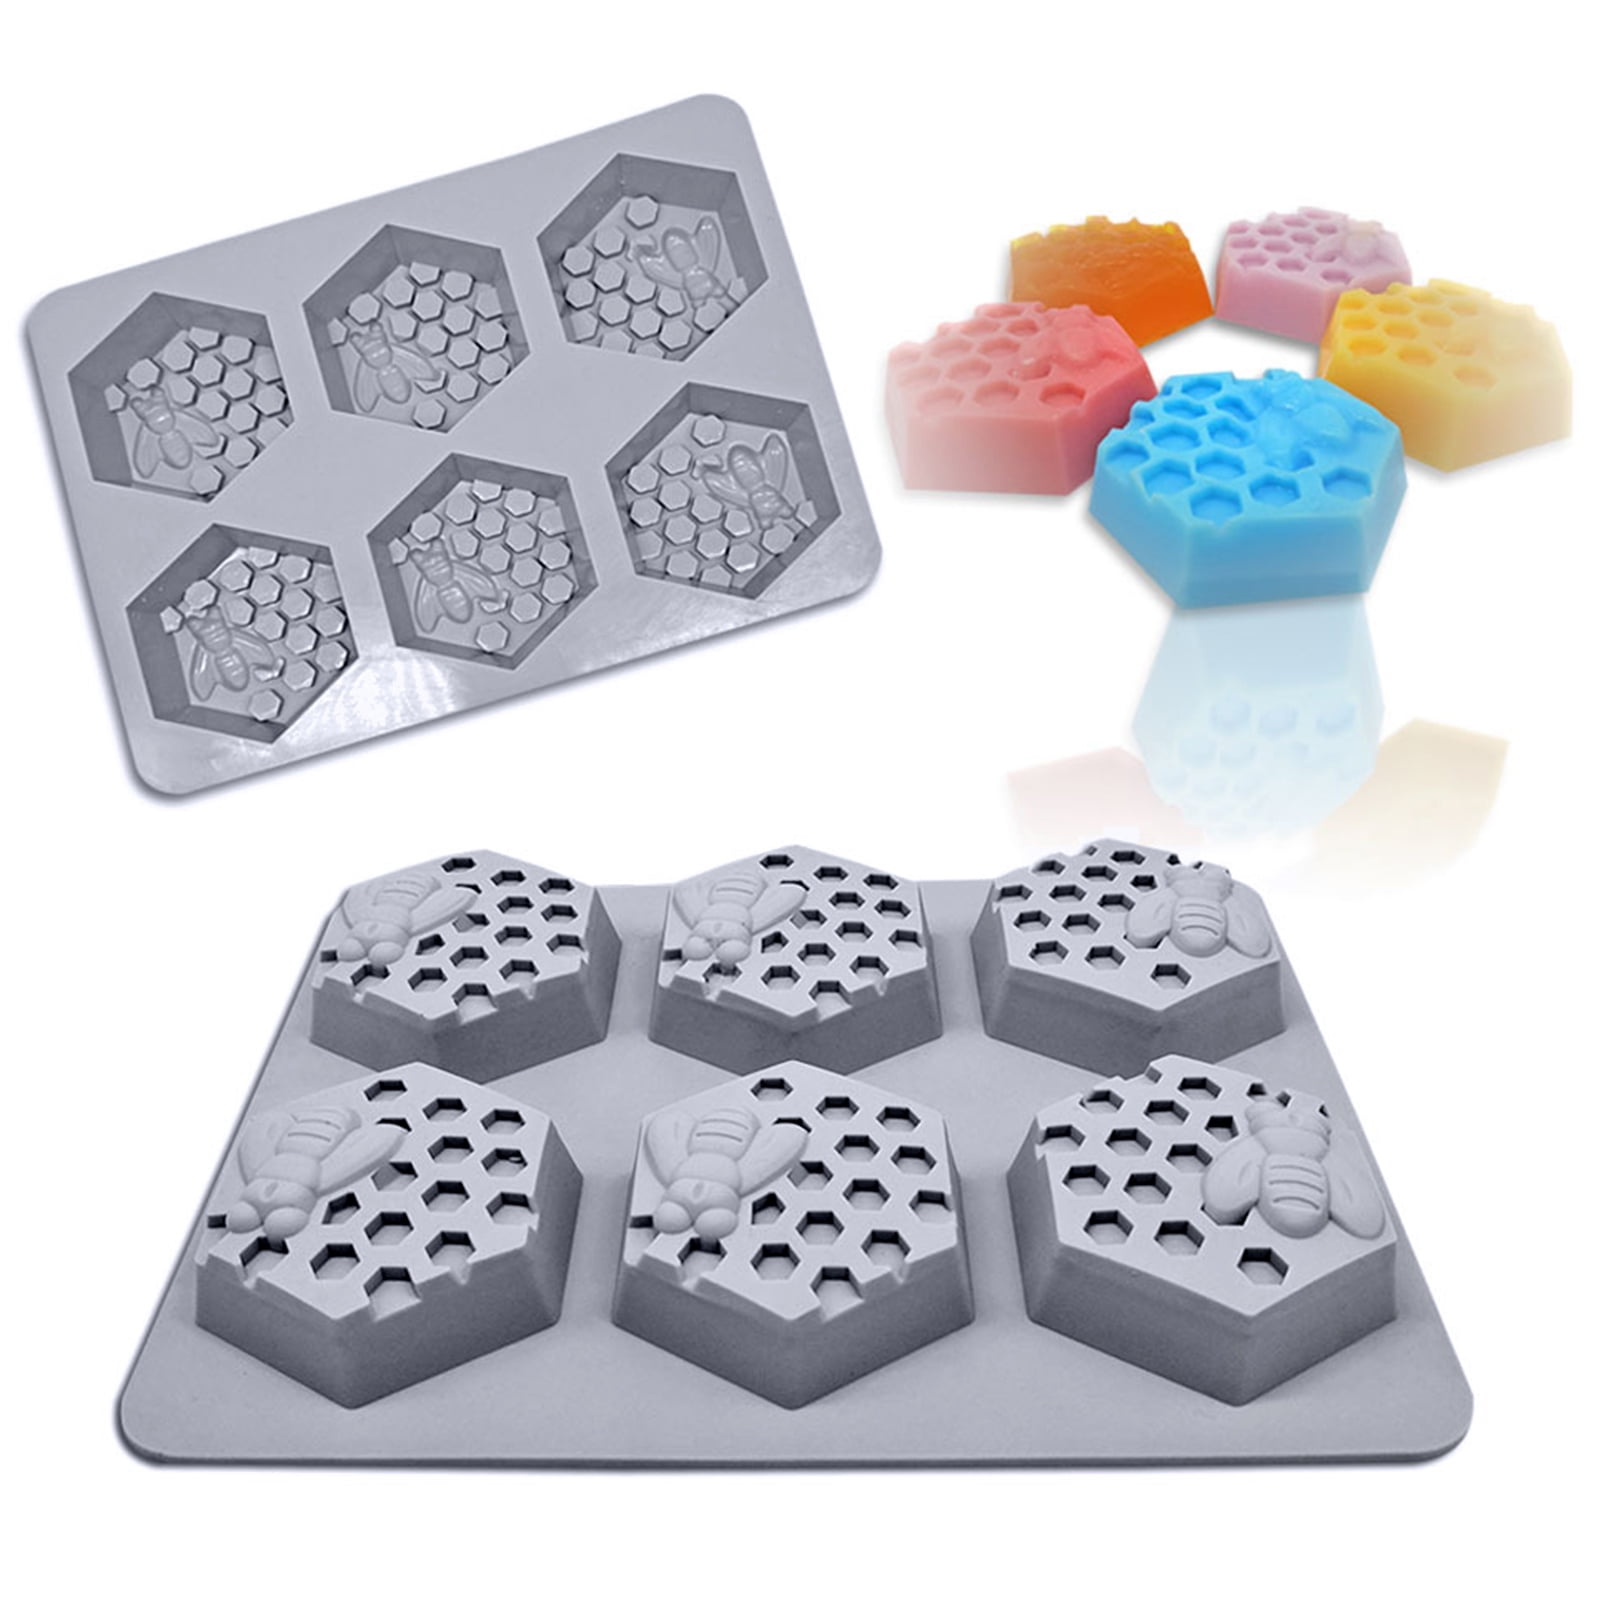 Best Baking Bee Honeycomb Cake Mold Soap Mold Silicone Flexible Chocolate Mould 